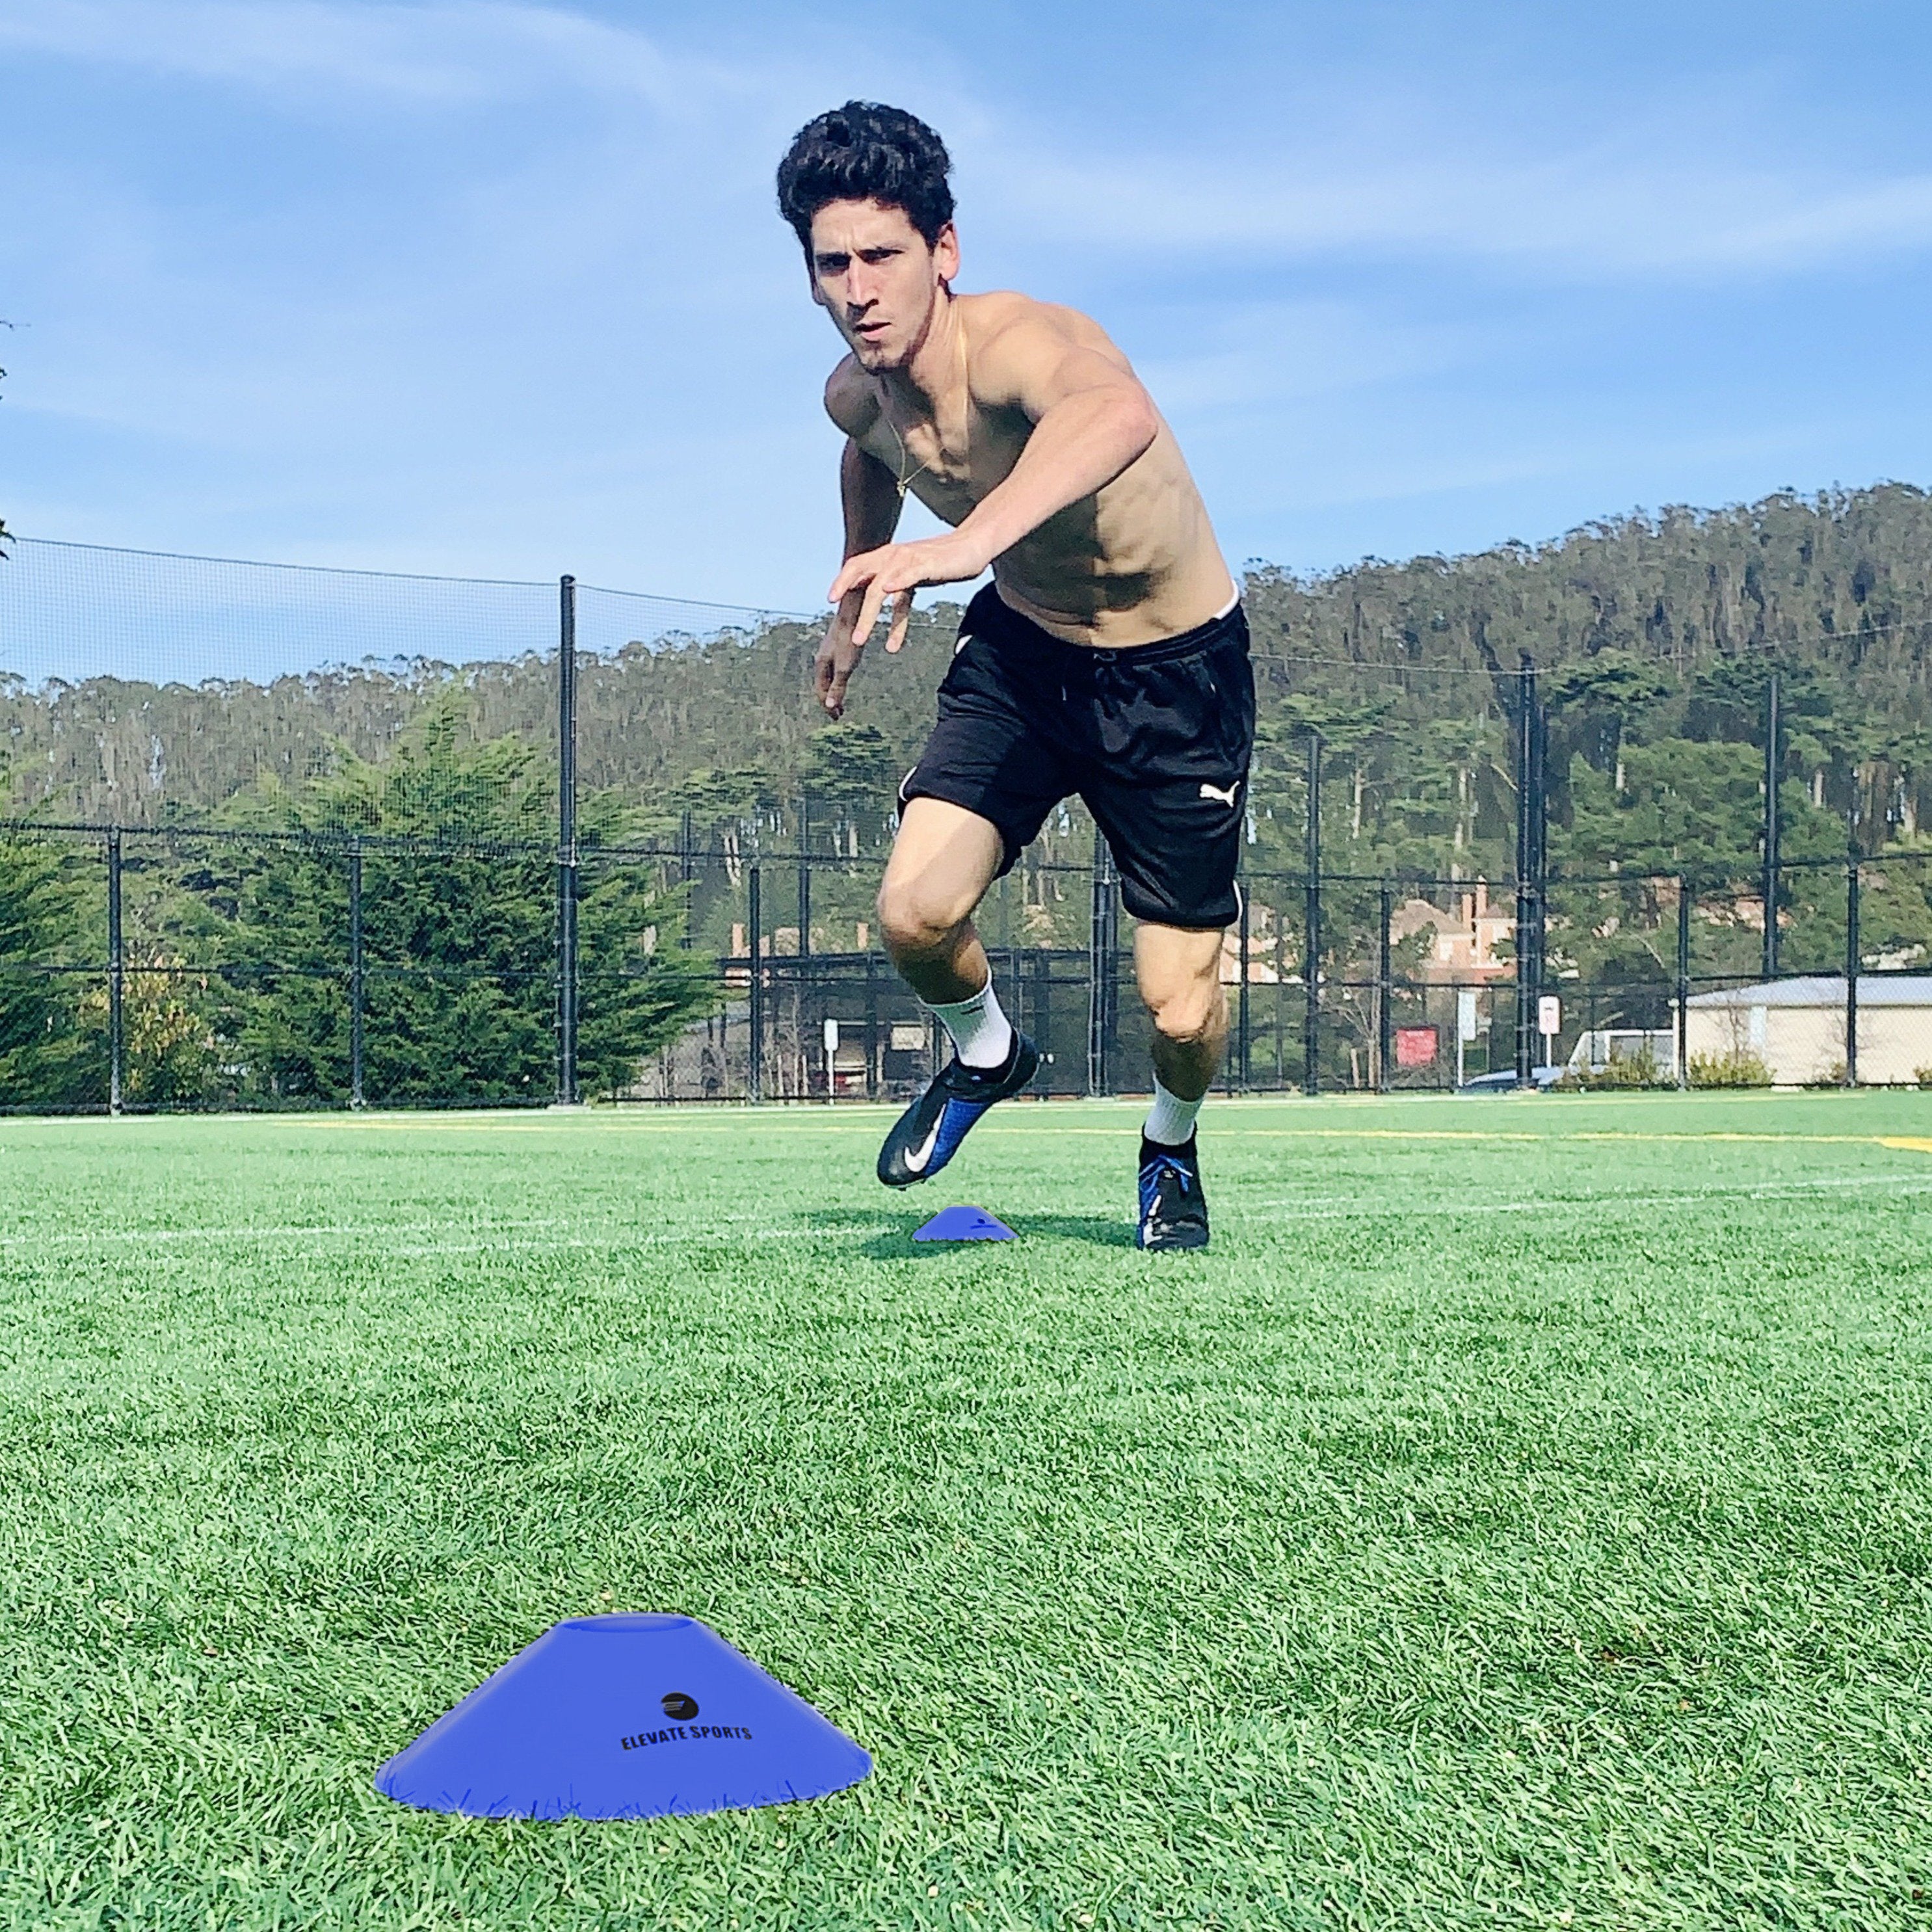 Training with speed cones can increase speed, endurance, change of direction, and quickness.